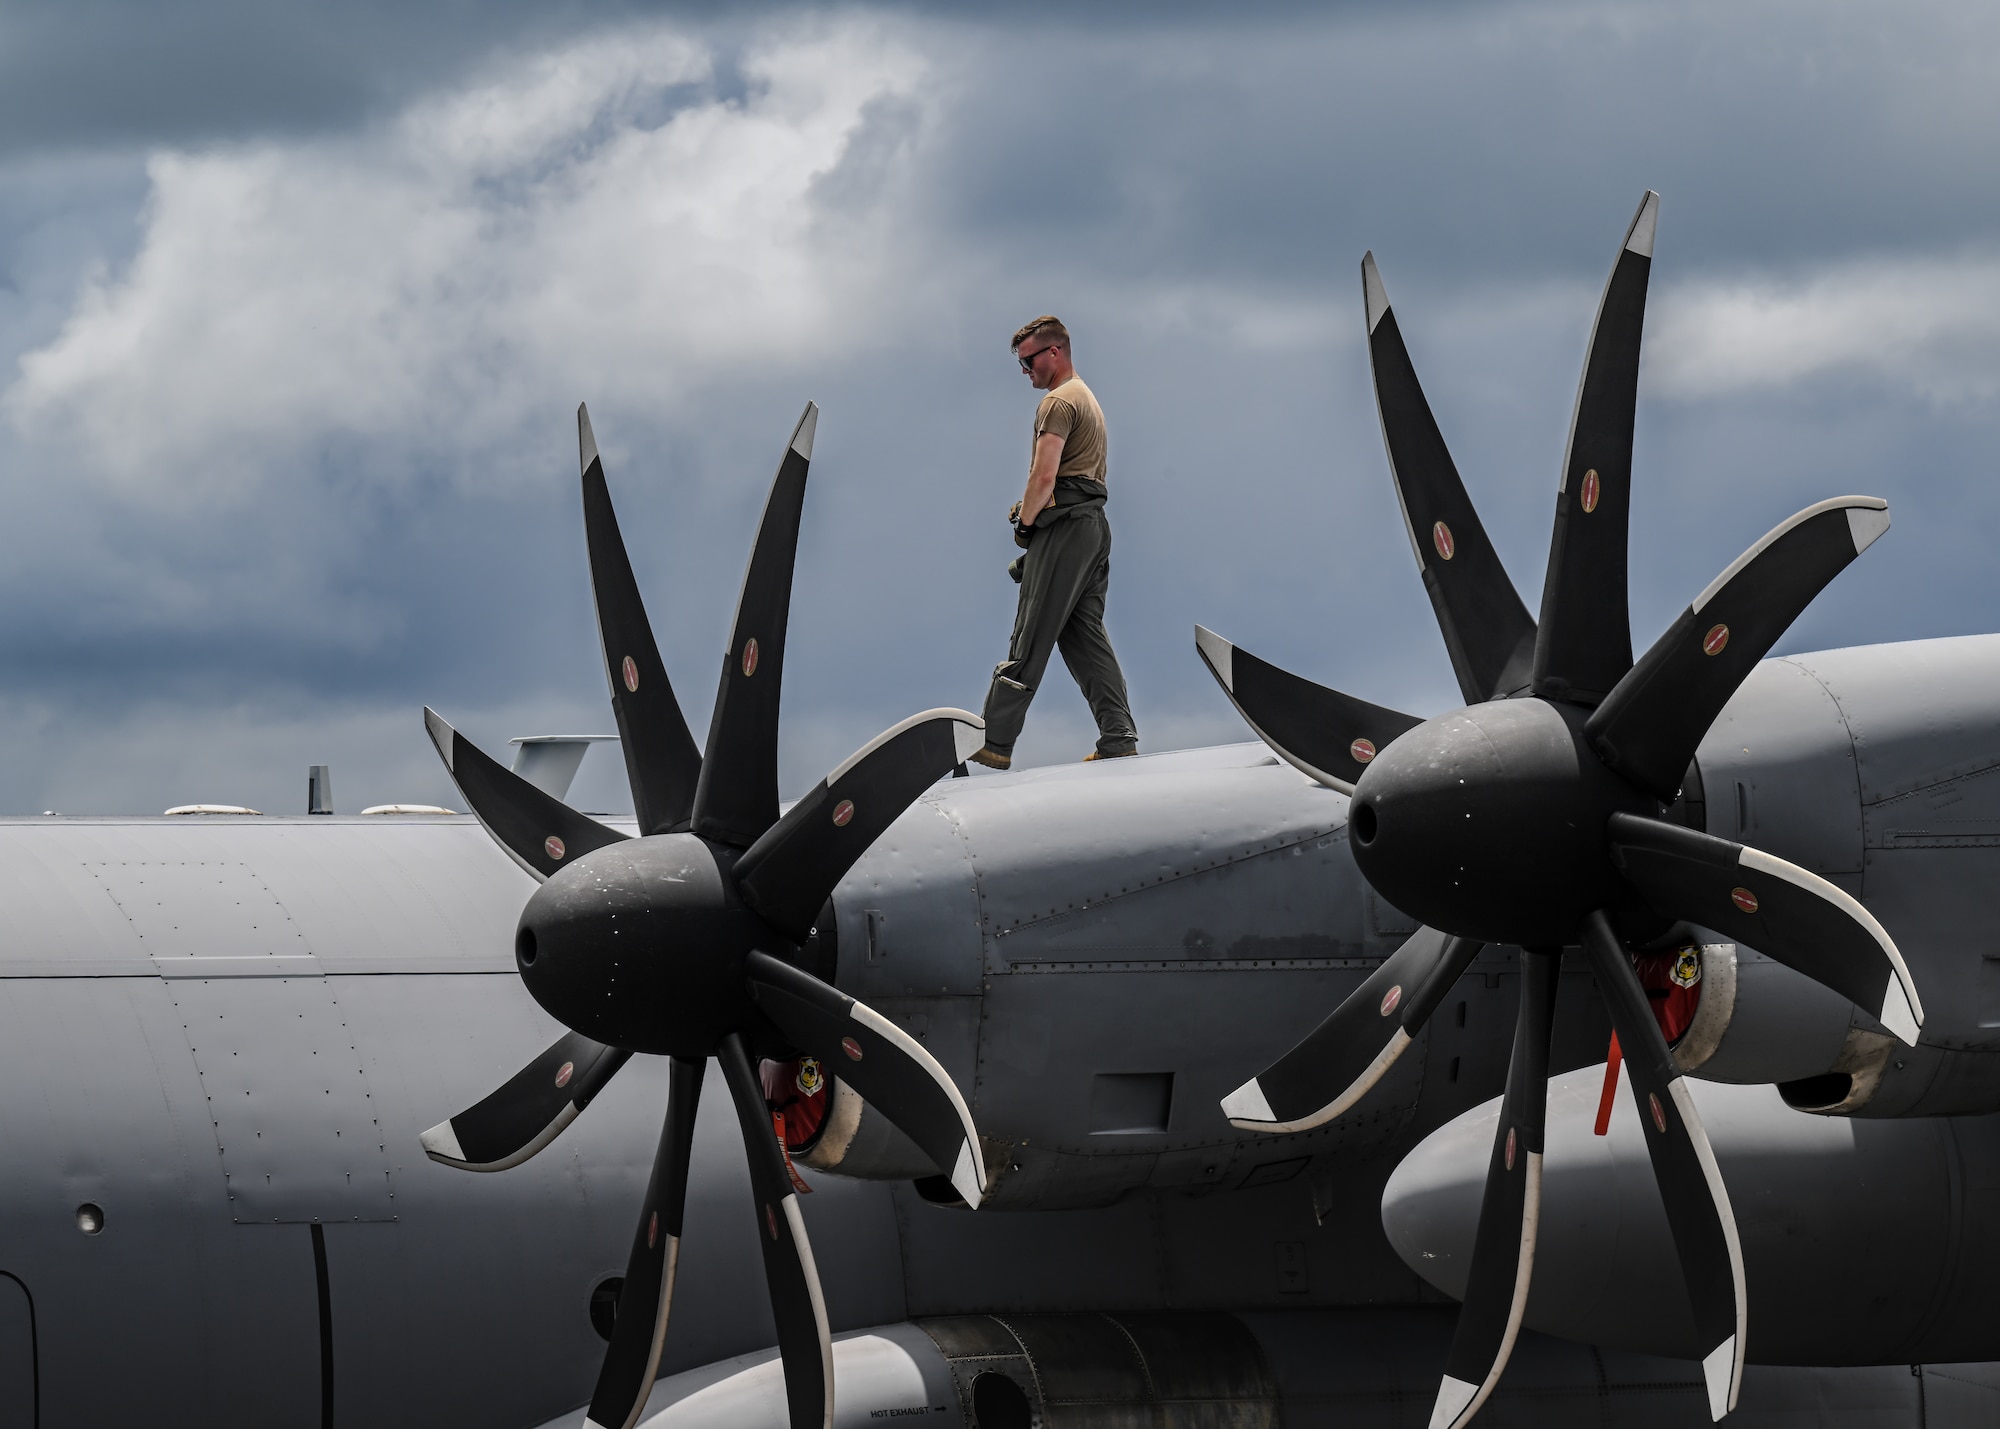 U.S. Air Force flight engineer and maintainer perform routine maintenance checks on a C-130H Hercules aircraft.